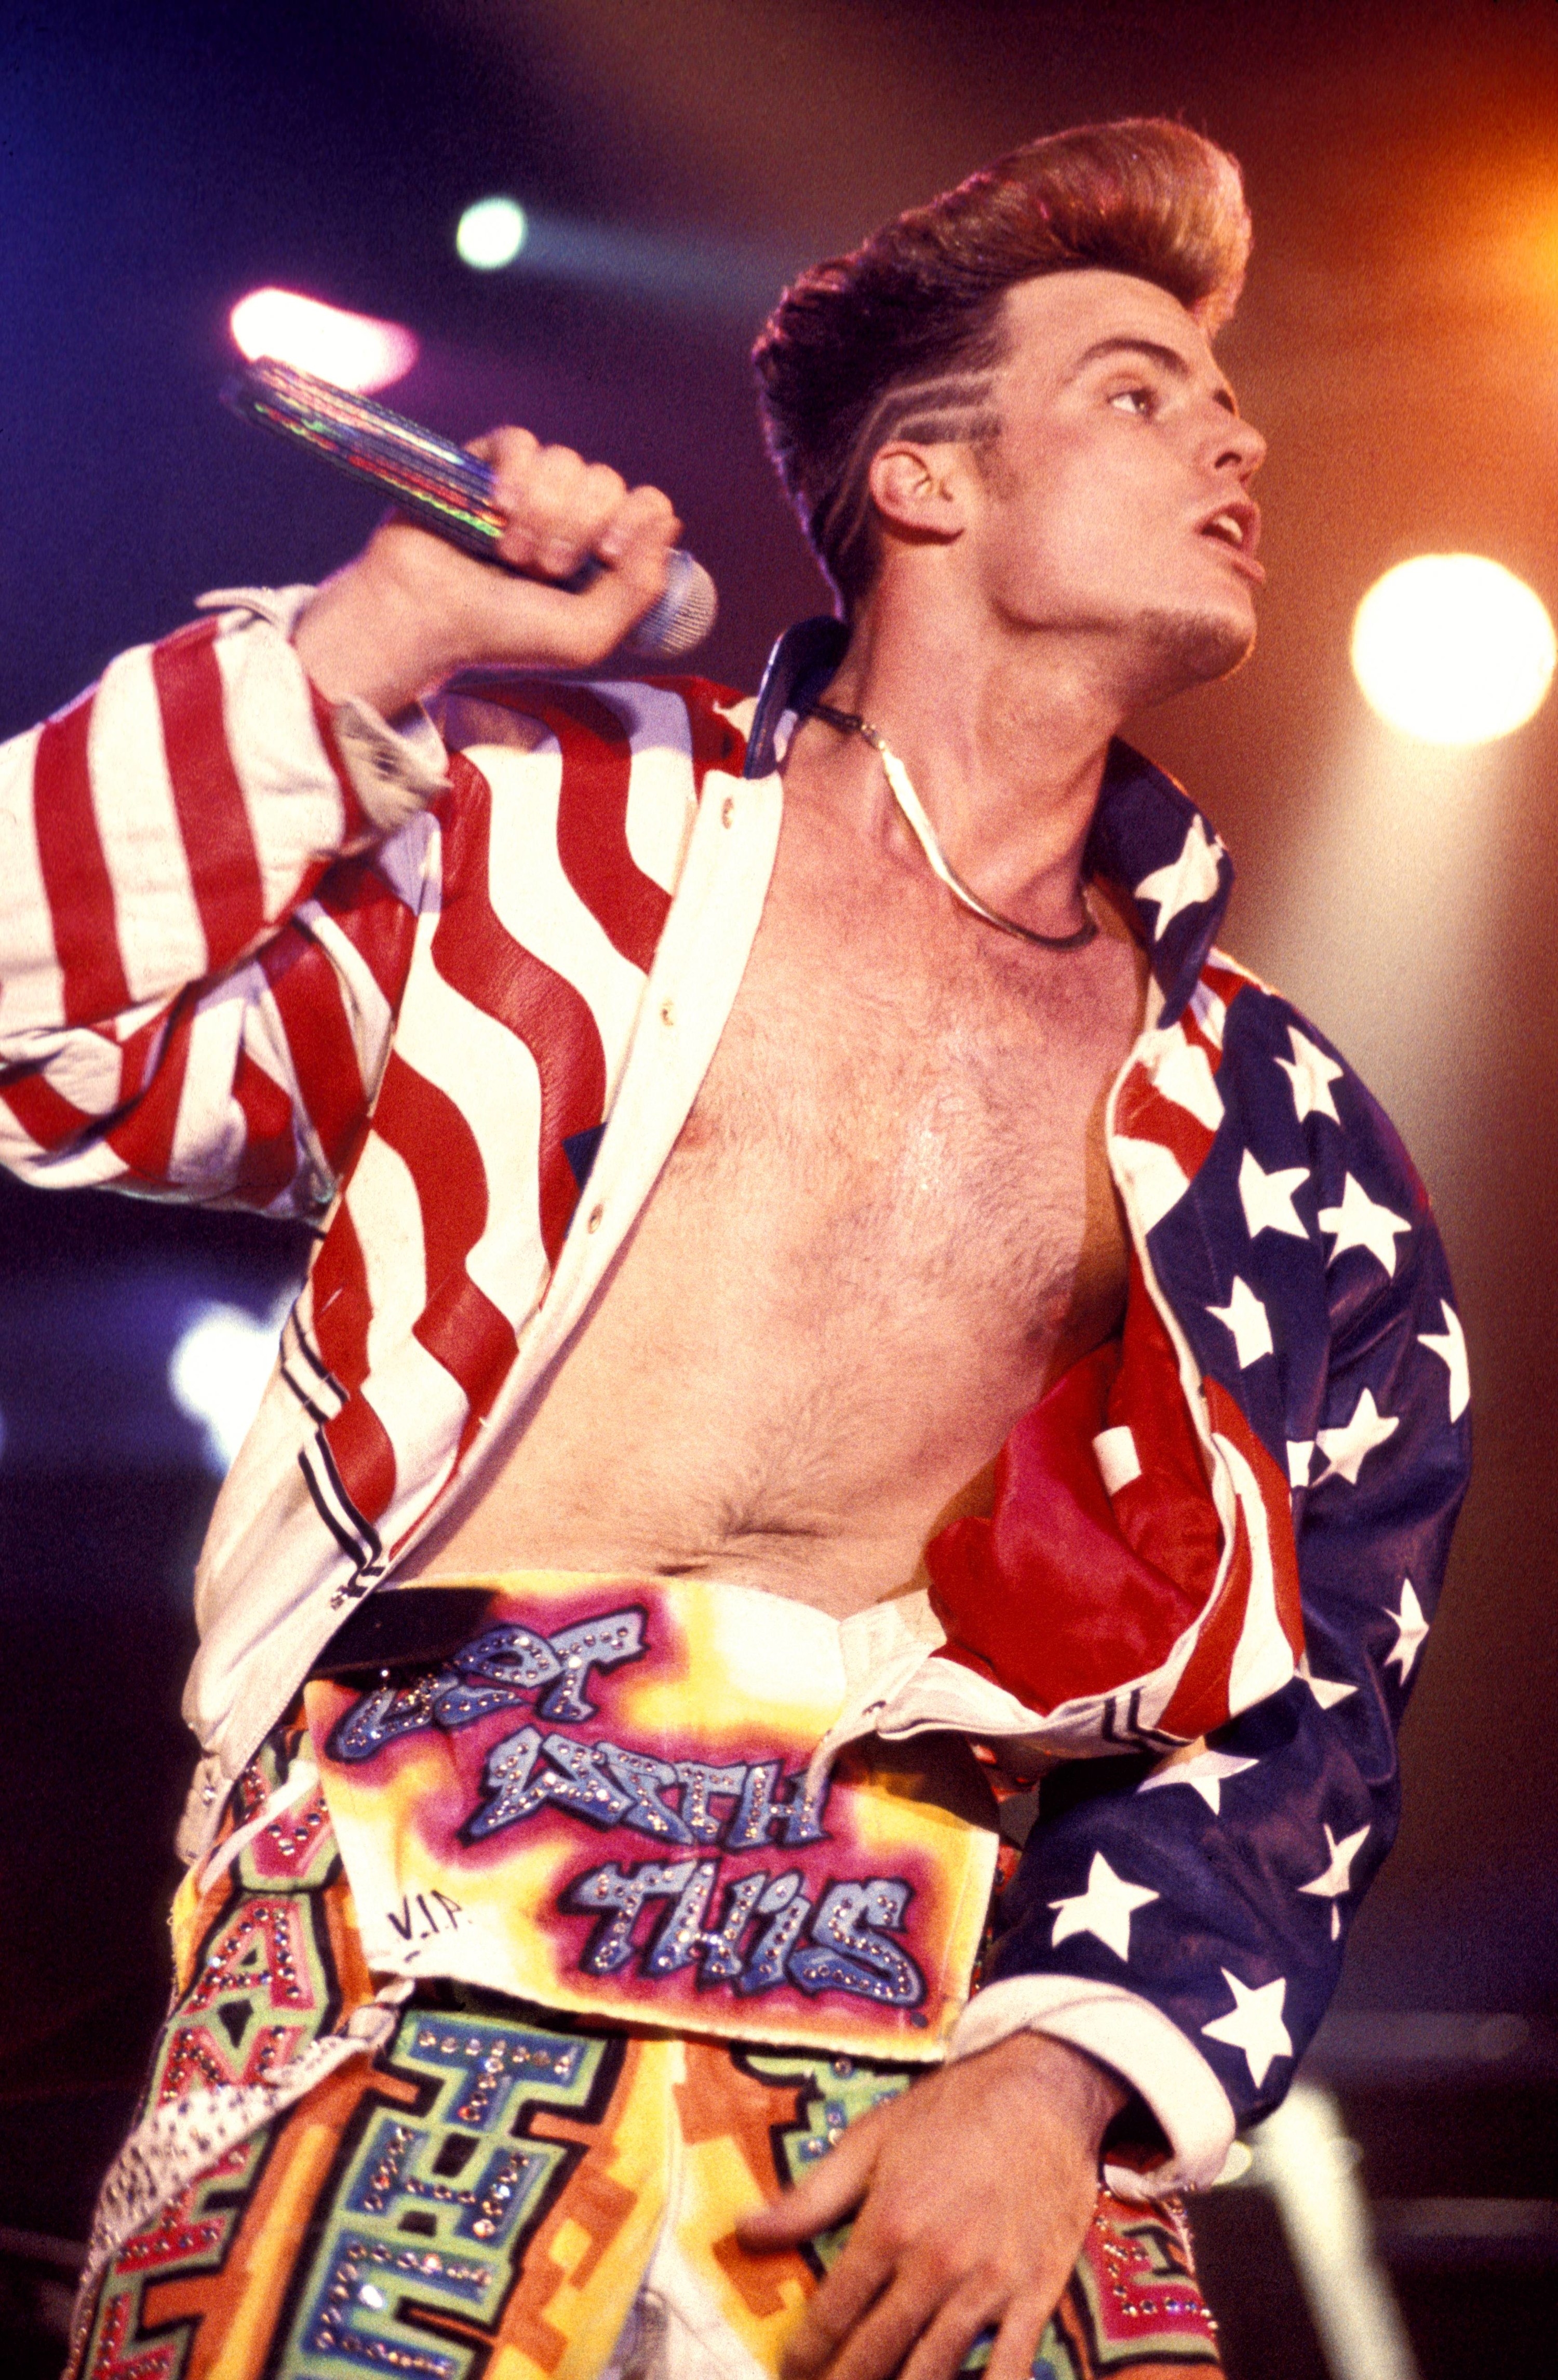 Vanilla Ice onstage with flashy clothes